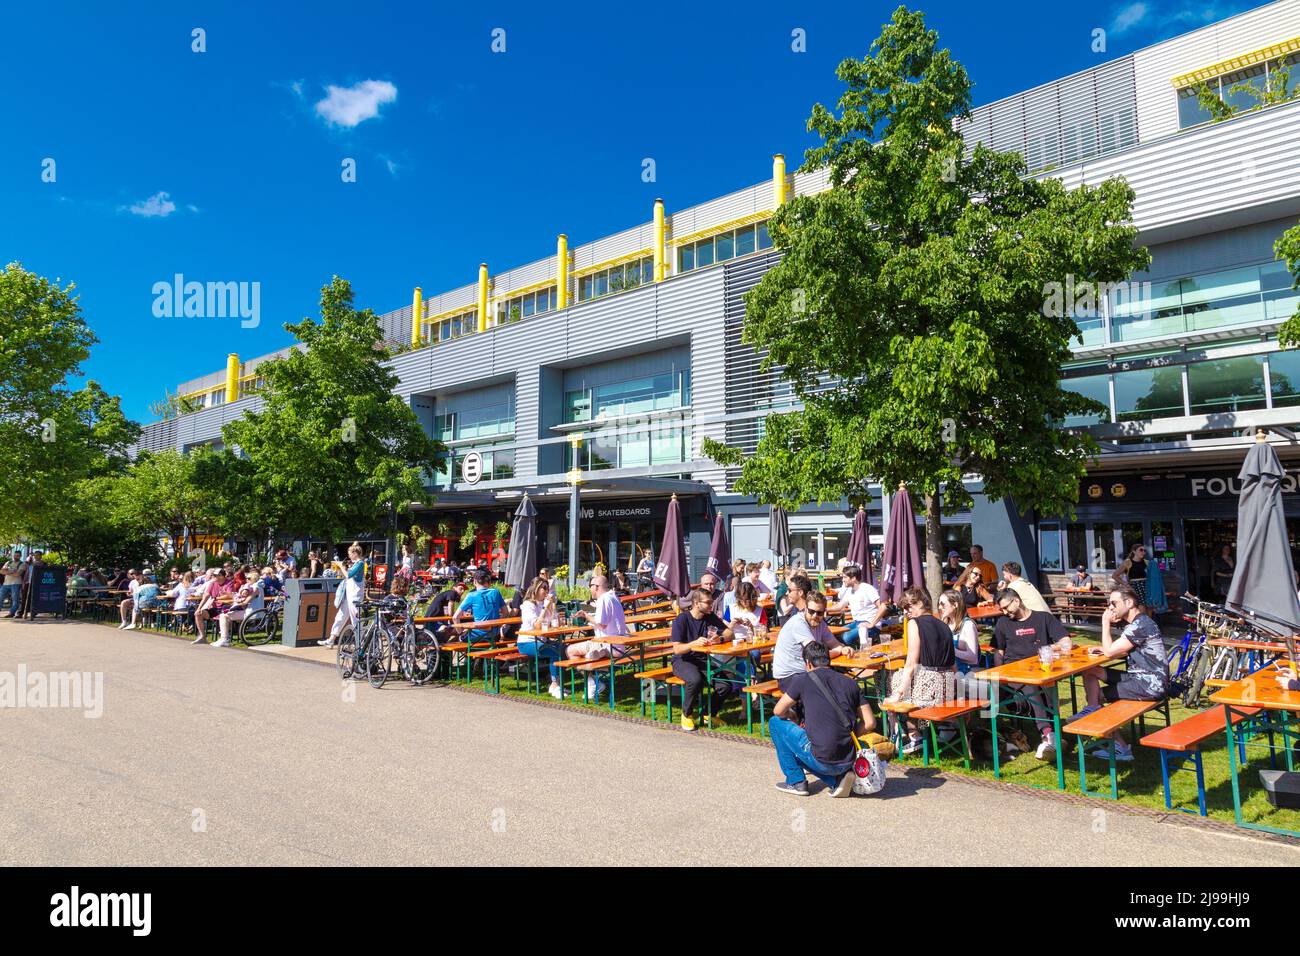 People relaxing at restaurants in Here East on a sunny day along the River Lee Navigation canal, Olympic Park, Stratford, London, UK Stock Photo